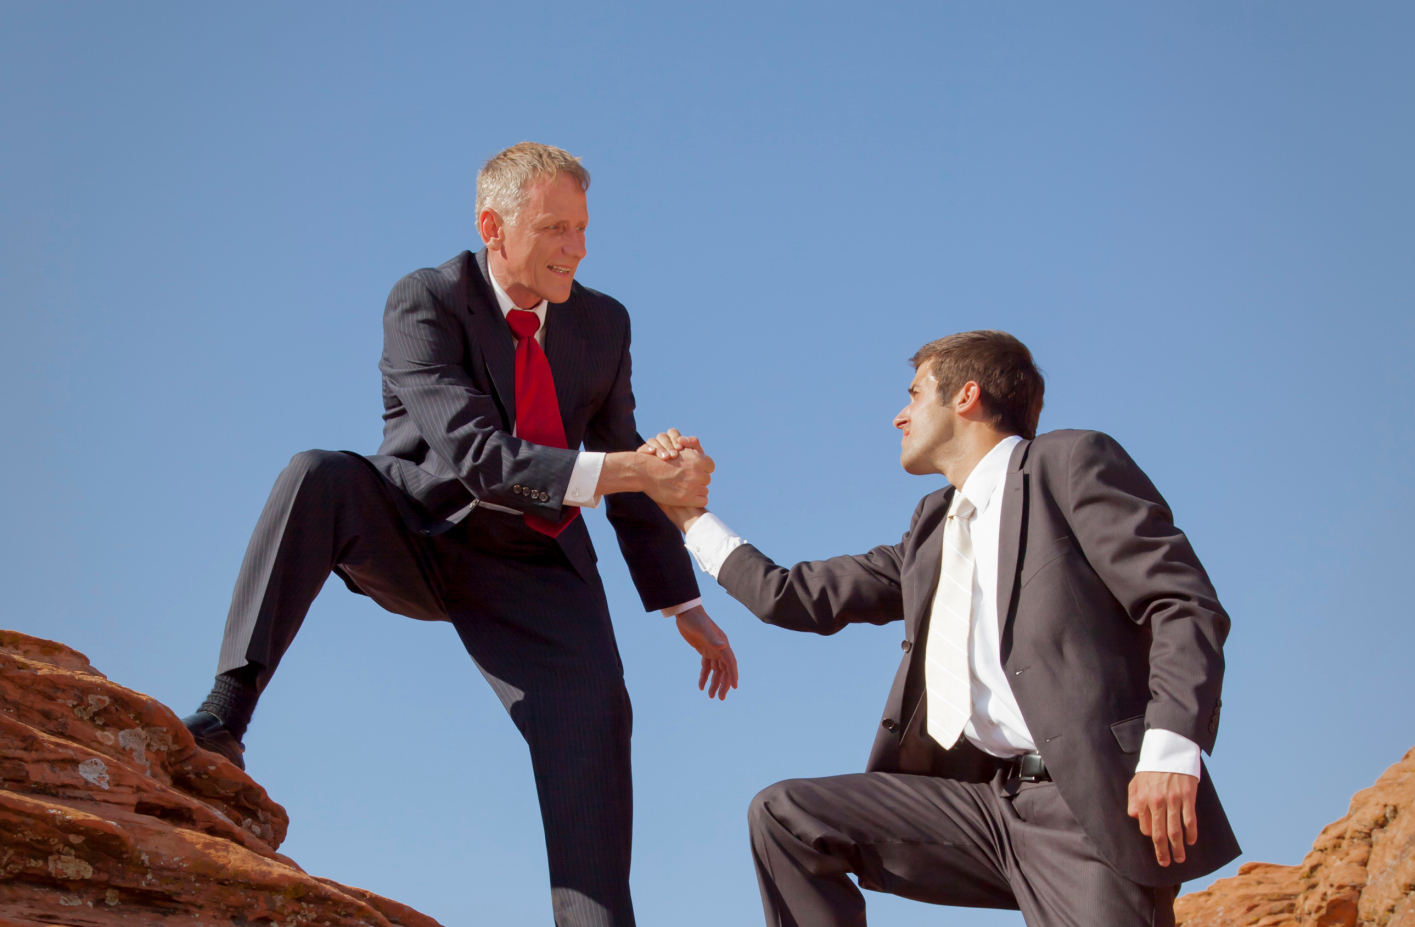  Two businessmen in suits, one on top of a rock and one below him reaching up to help him illustrates the challenges business leaders face in adopting AI.